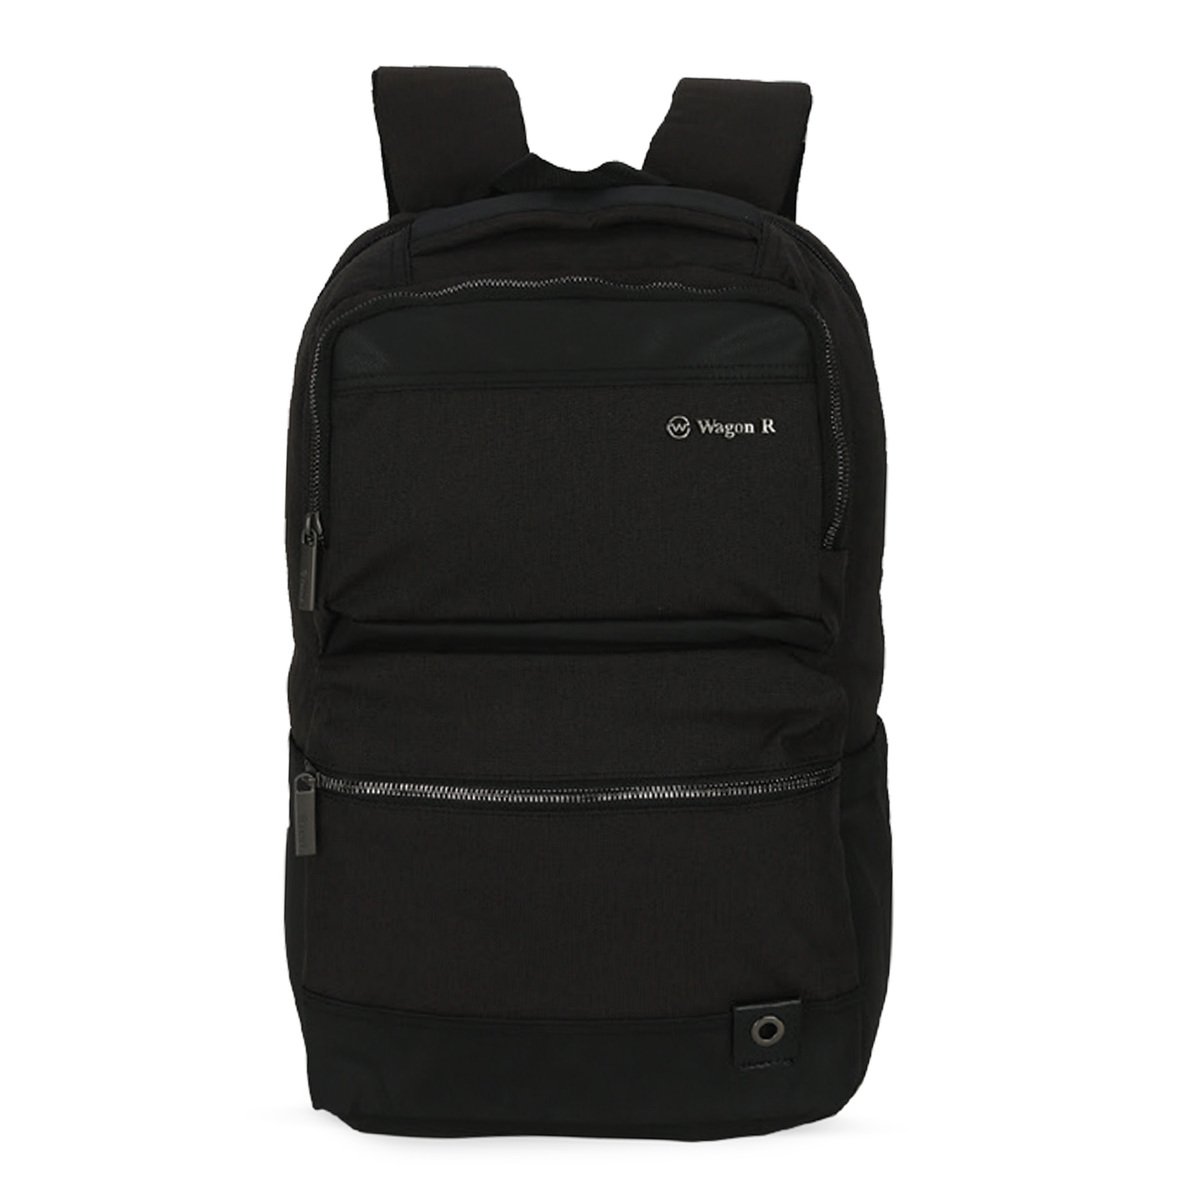 Wagon R Laptop Backpack 15.6inch ENL63415B Assorted